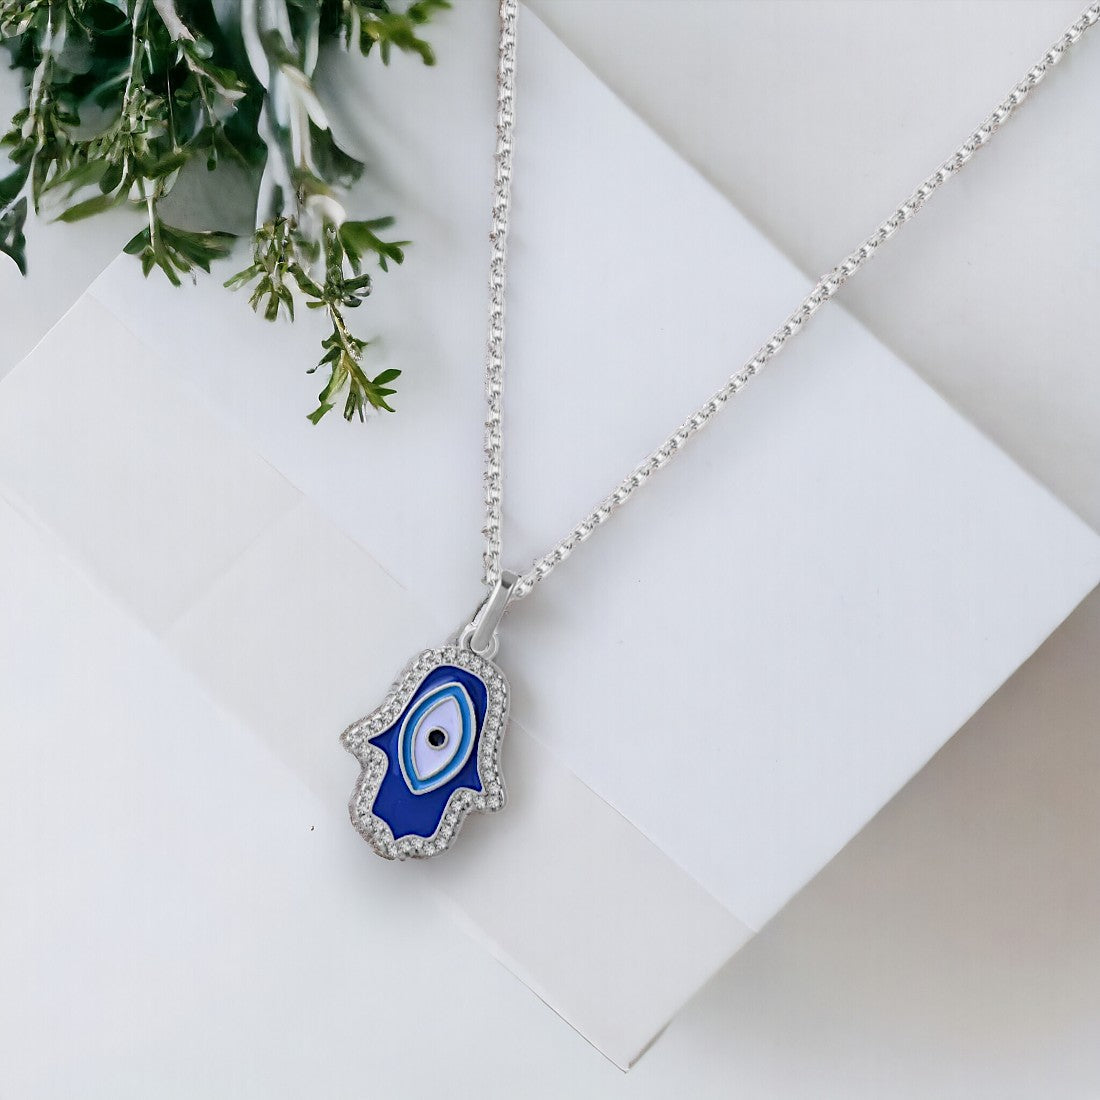 Hand Evil Eye Chain Pendant With Chain